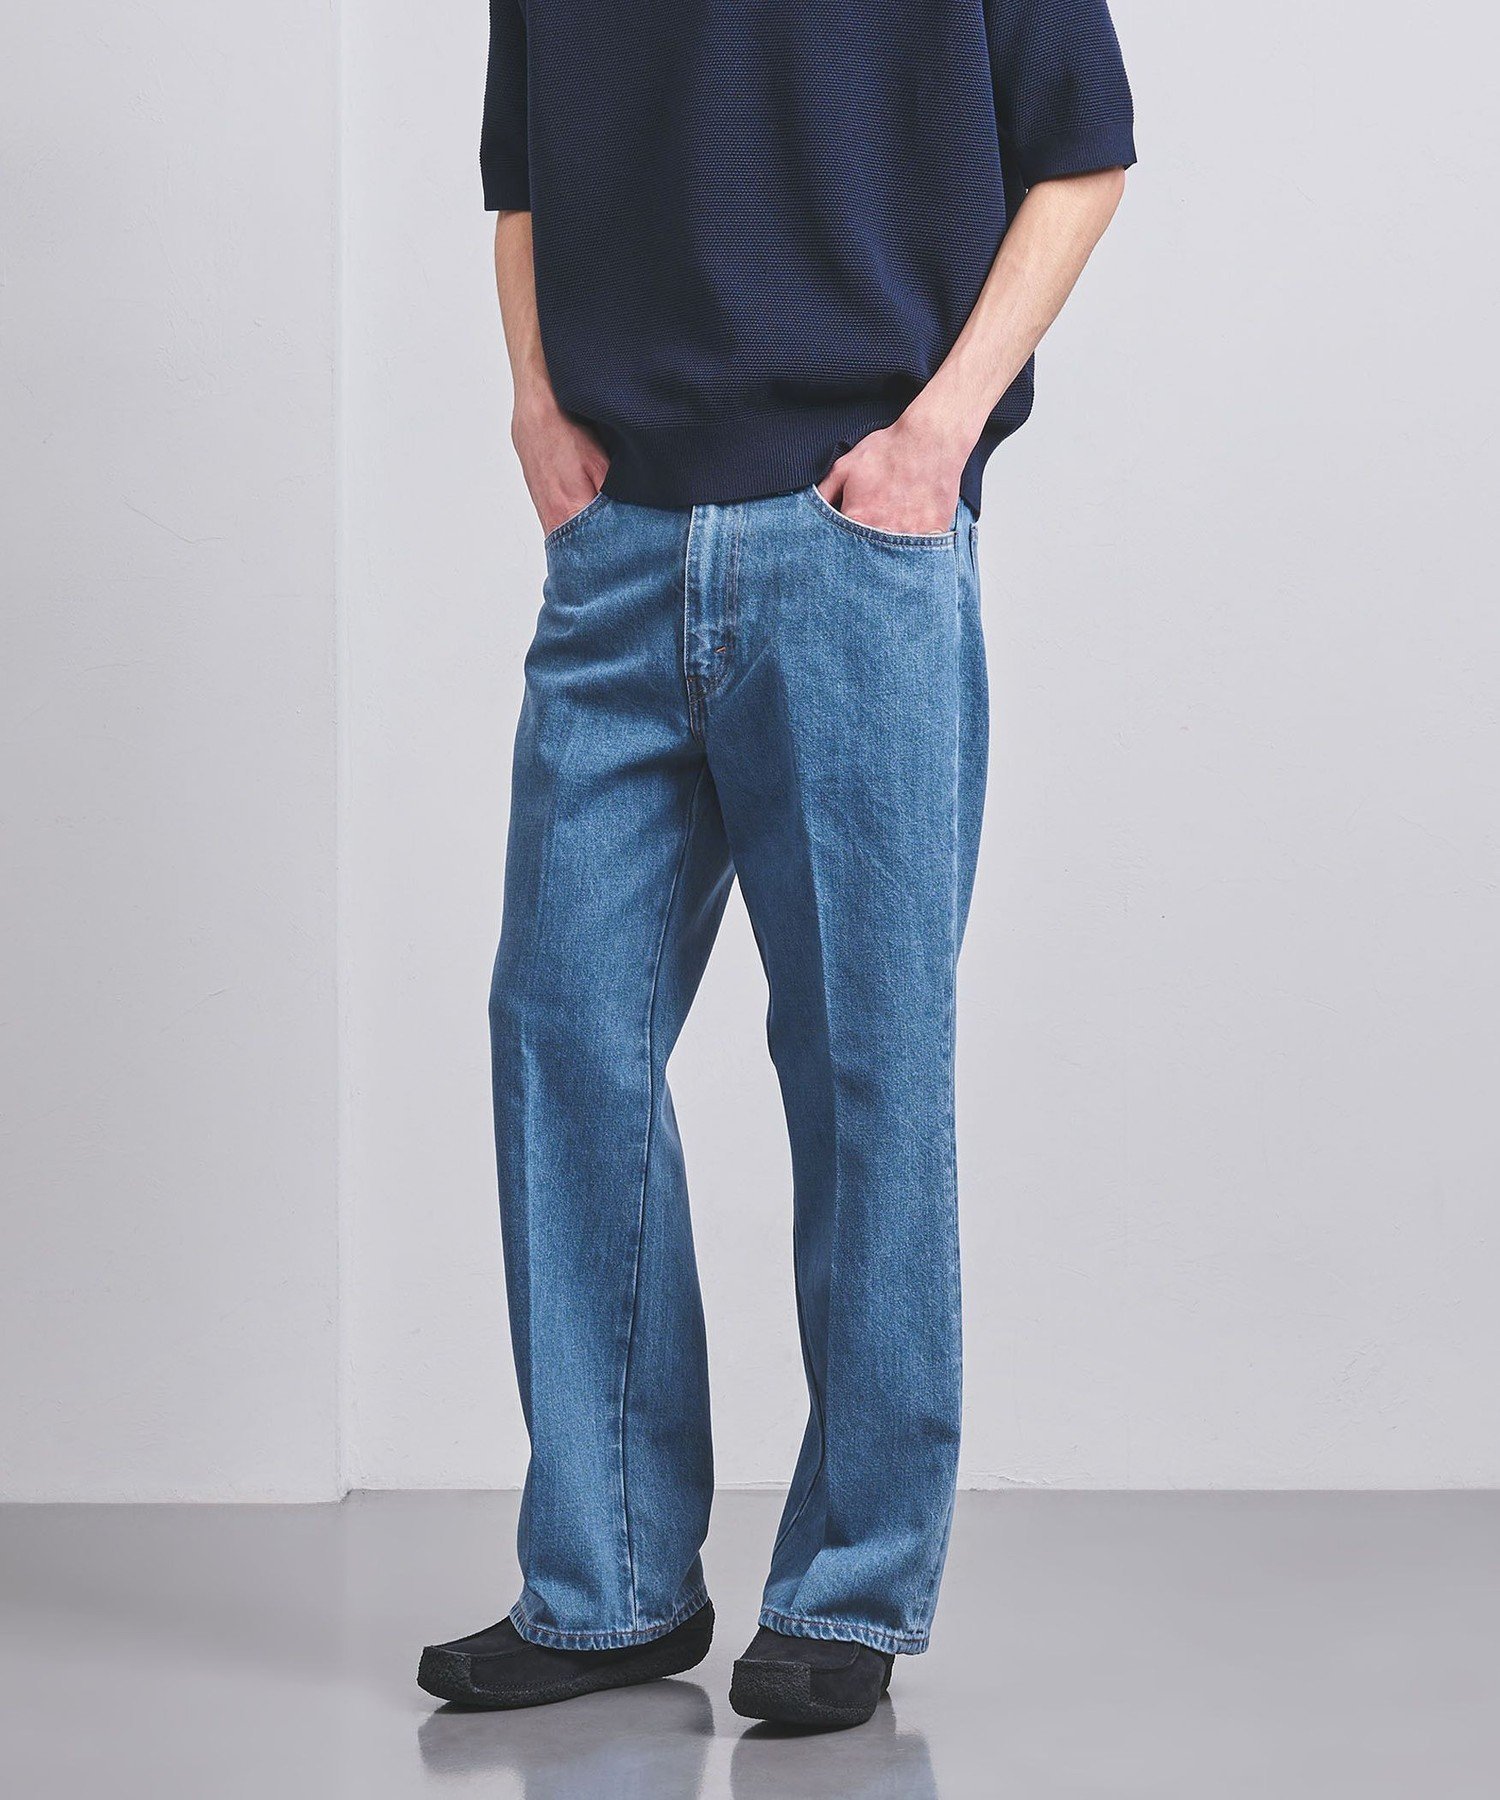 UNITED ARROWS Levi's STA-PREST FLARE JEANS MEDIUM TAP WATER/ץ쥹 ե쥢ѥ ʥƥåɥ ѥ 󥺡ǥ˥ѥ ֥롼̵